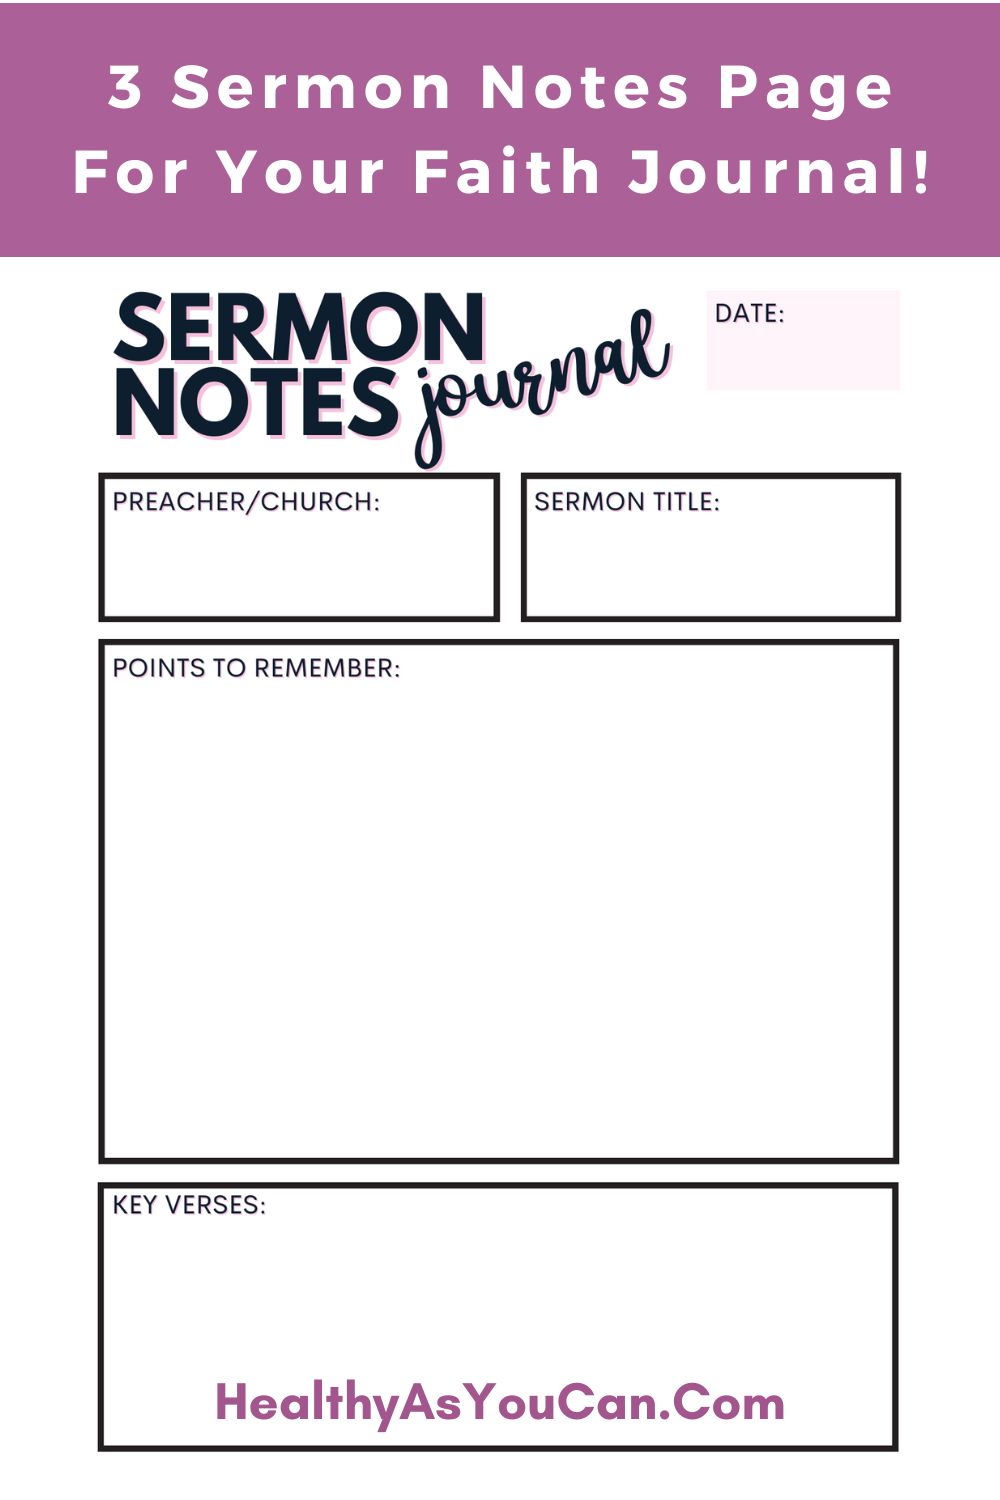 Sermon Notes Page with boxes for notes 